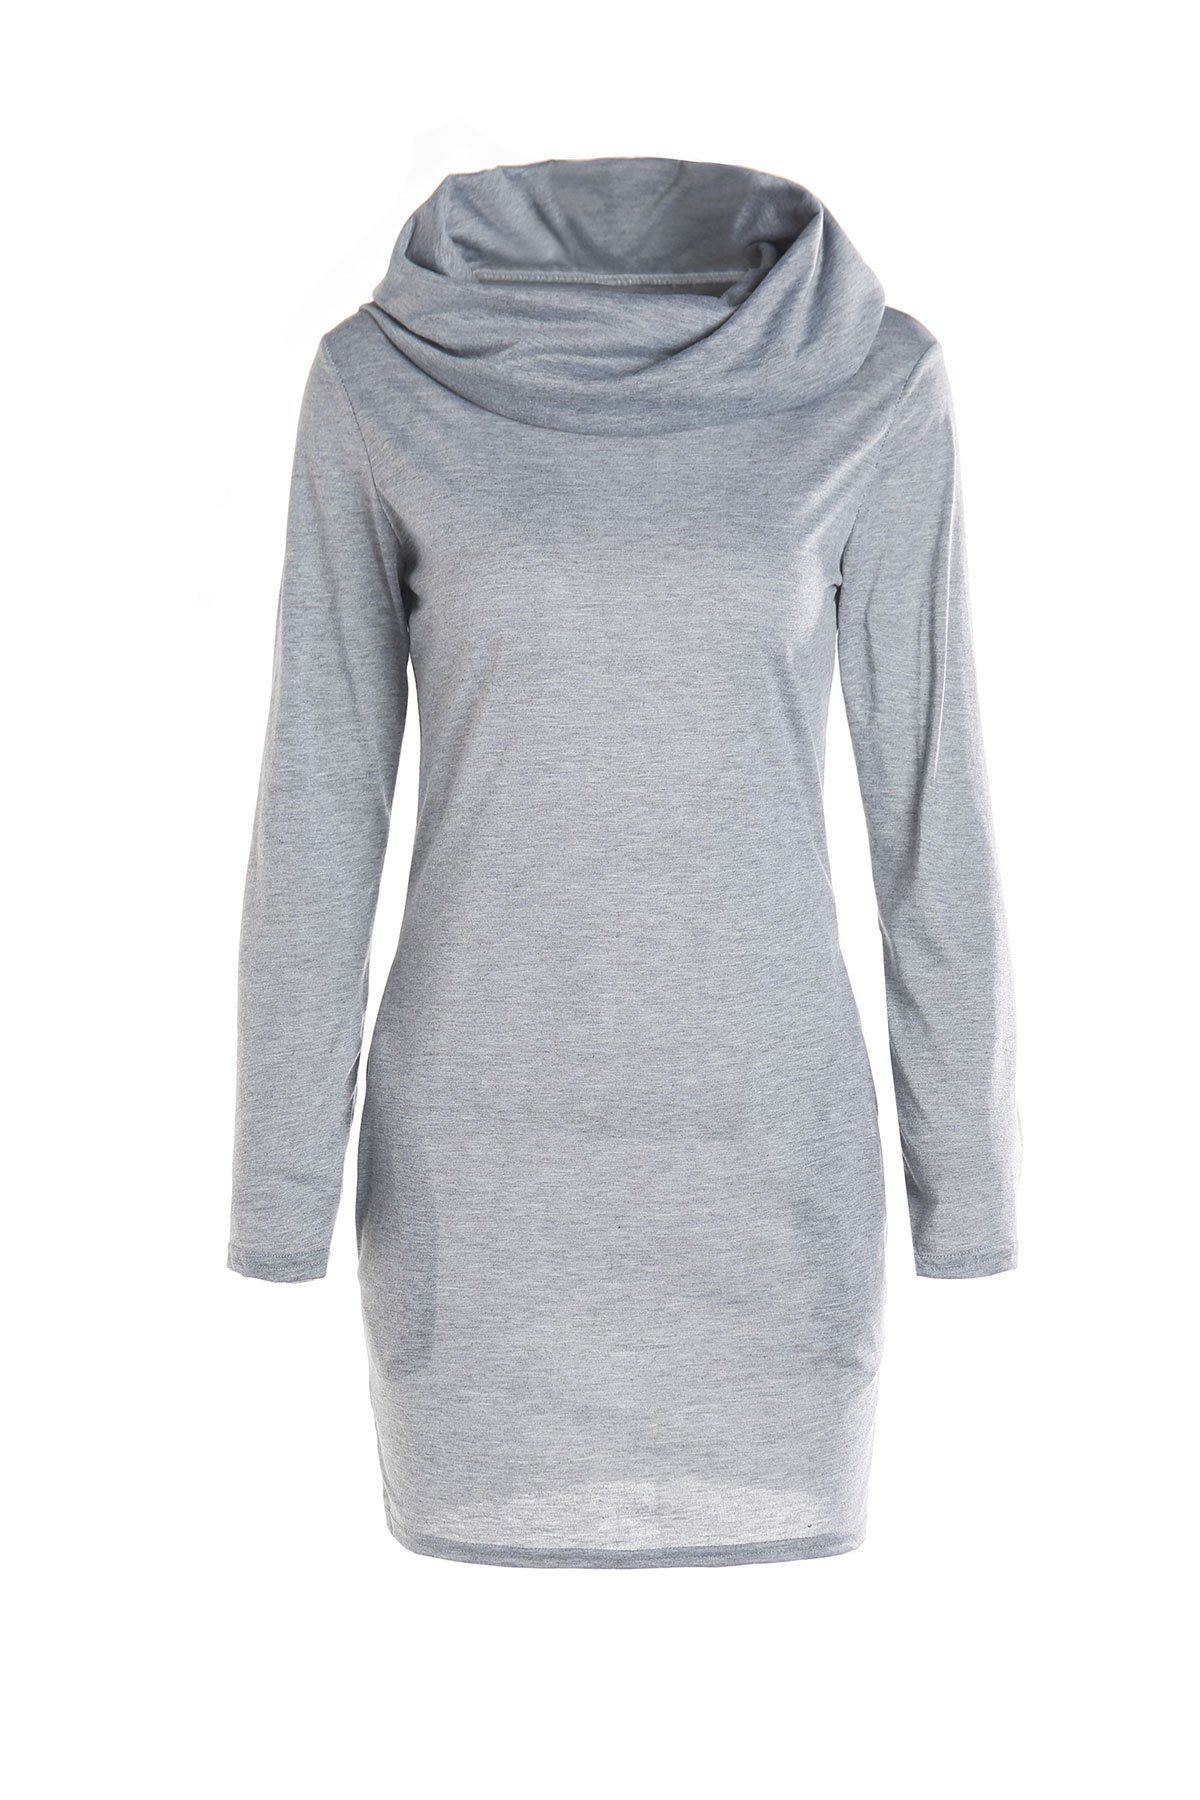 Stylish Hooded Long Sleeve Bodycon Solid Color Women's Dress - GRAY S